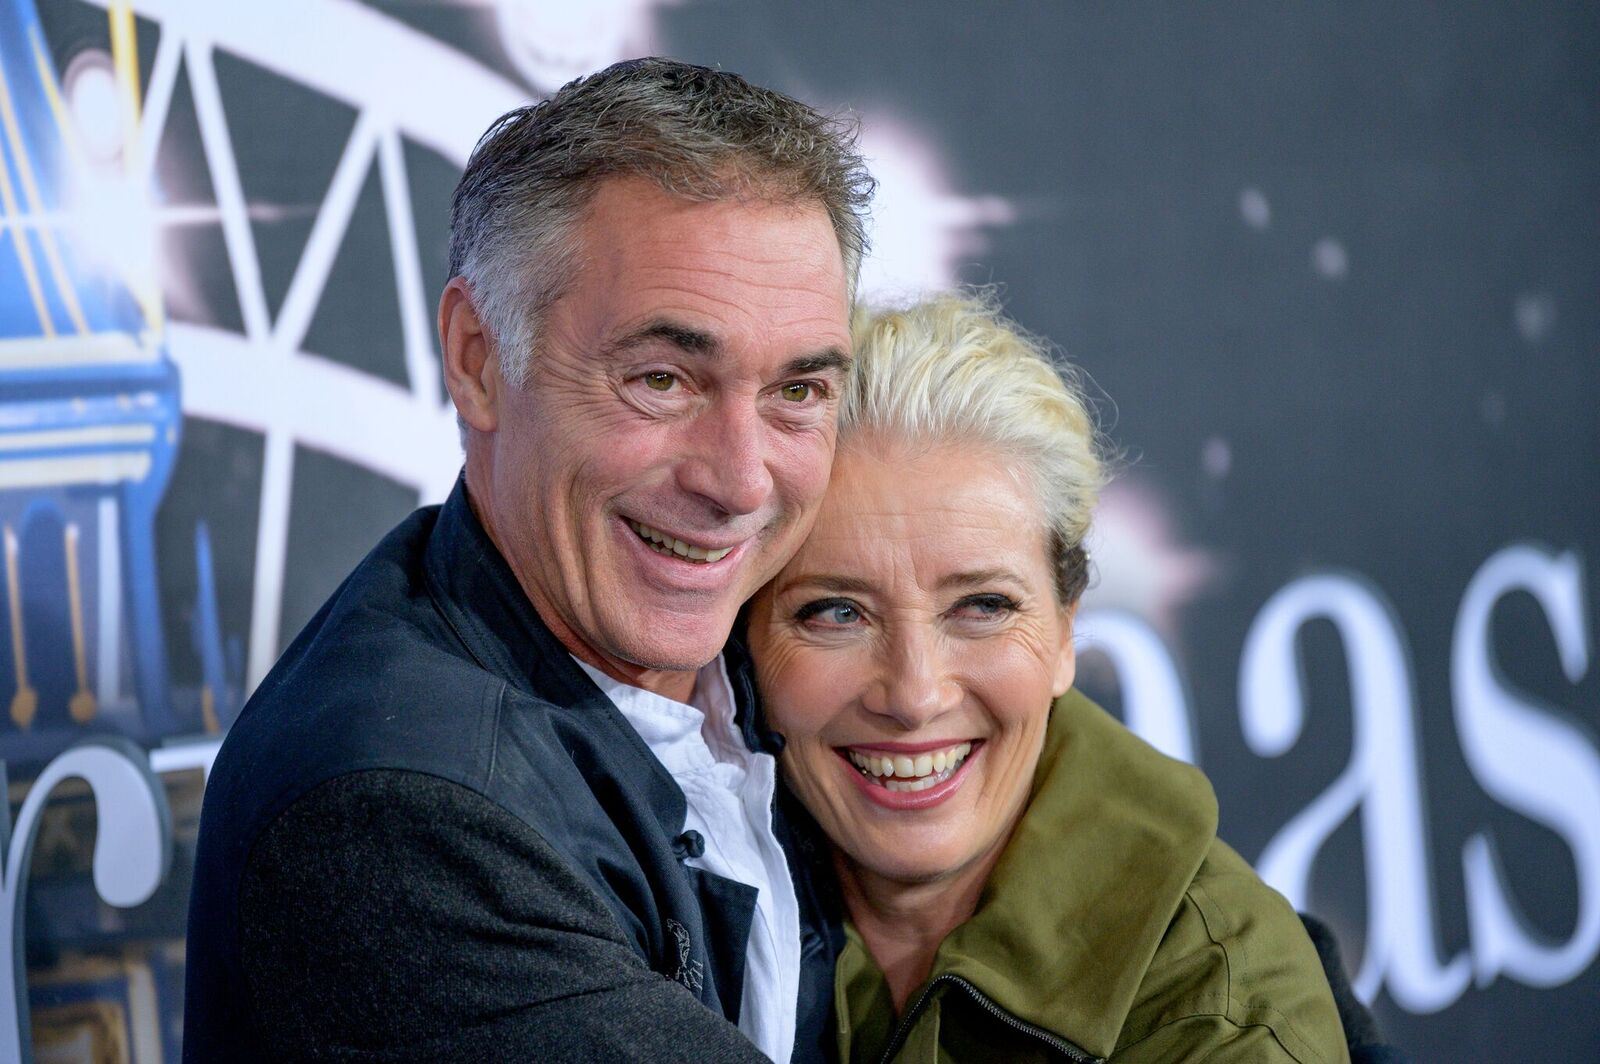 Greg Wise and Emma Thompson at the "Last Christmas" New York Premiere on October 29, 2019, in New York City | Photo: Roy Rochlin/Getty Images